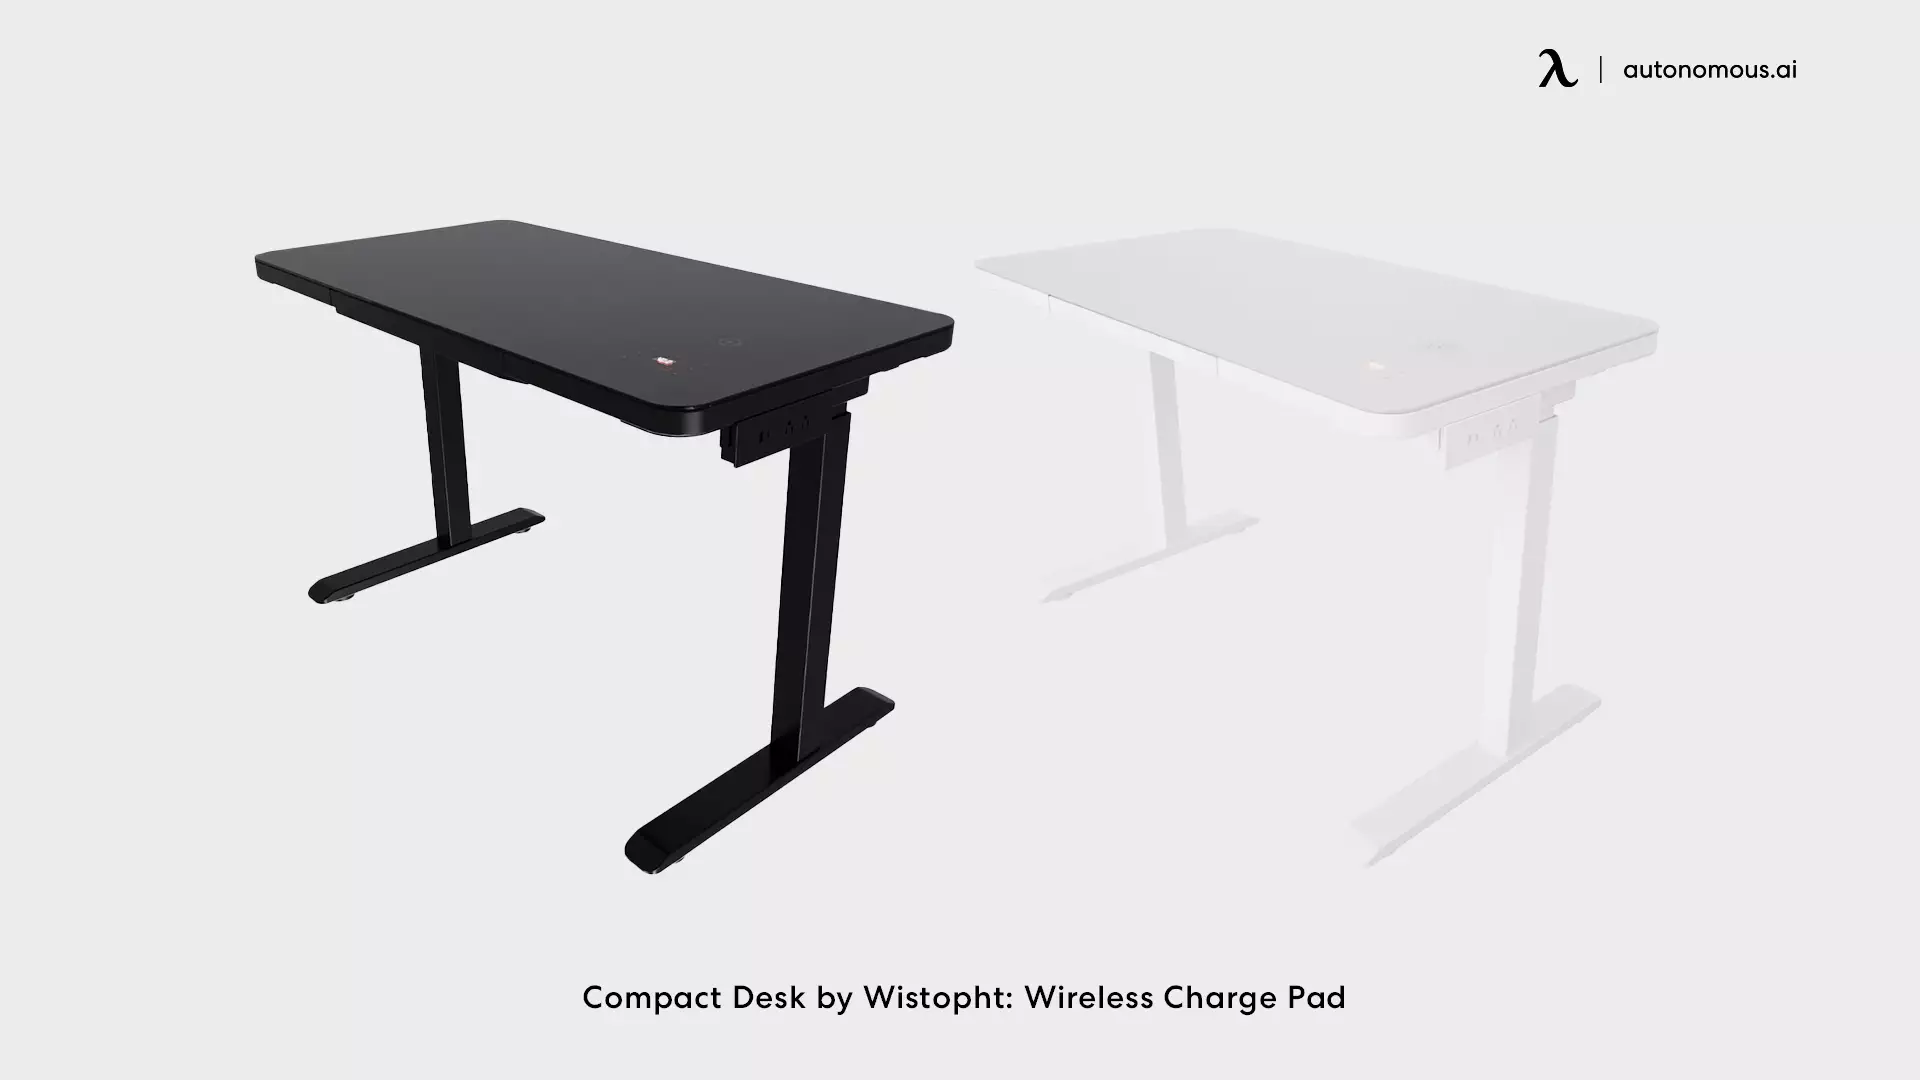 Wistopht Compact Desk: Wireless Charge Pad